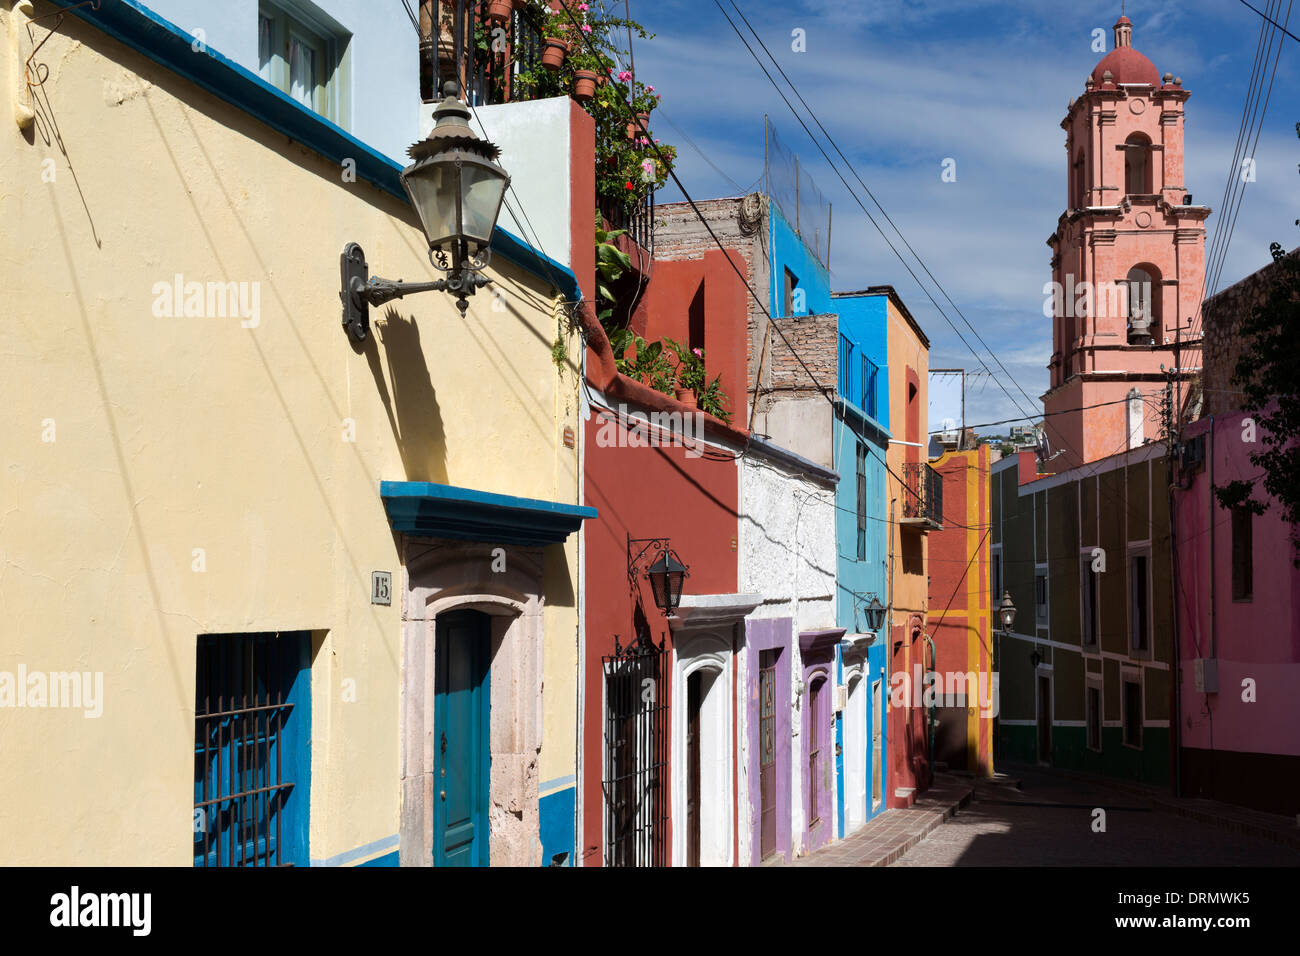 Houses with colorful facades in a typical street in the center of the city of Guanajuato Stock Photo